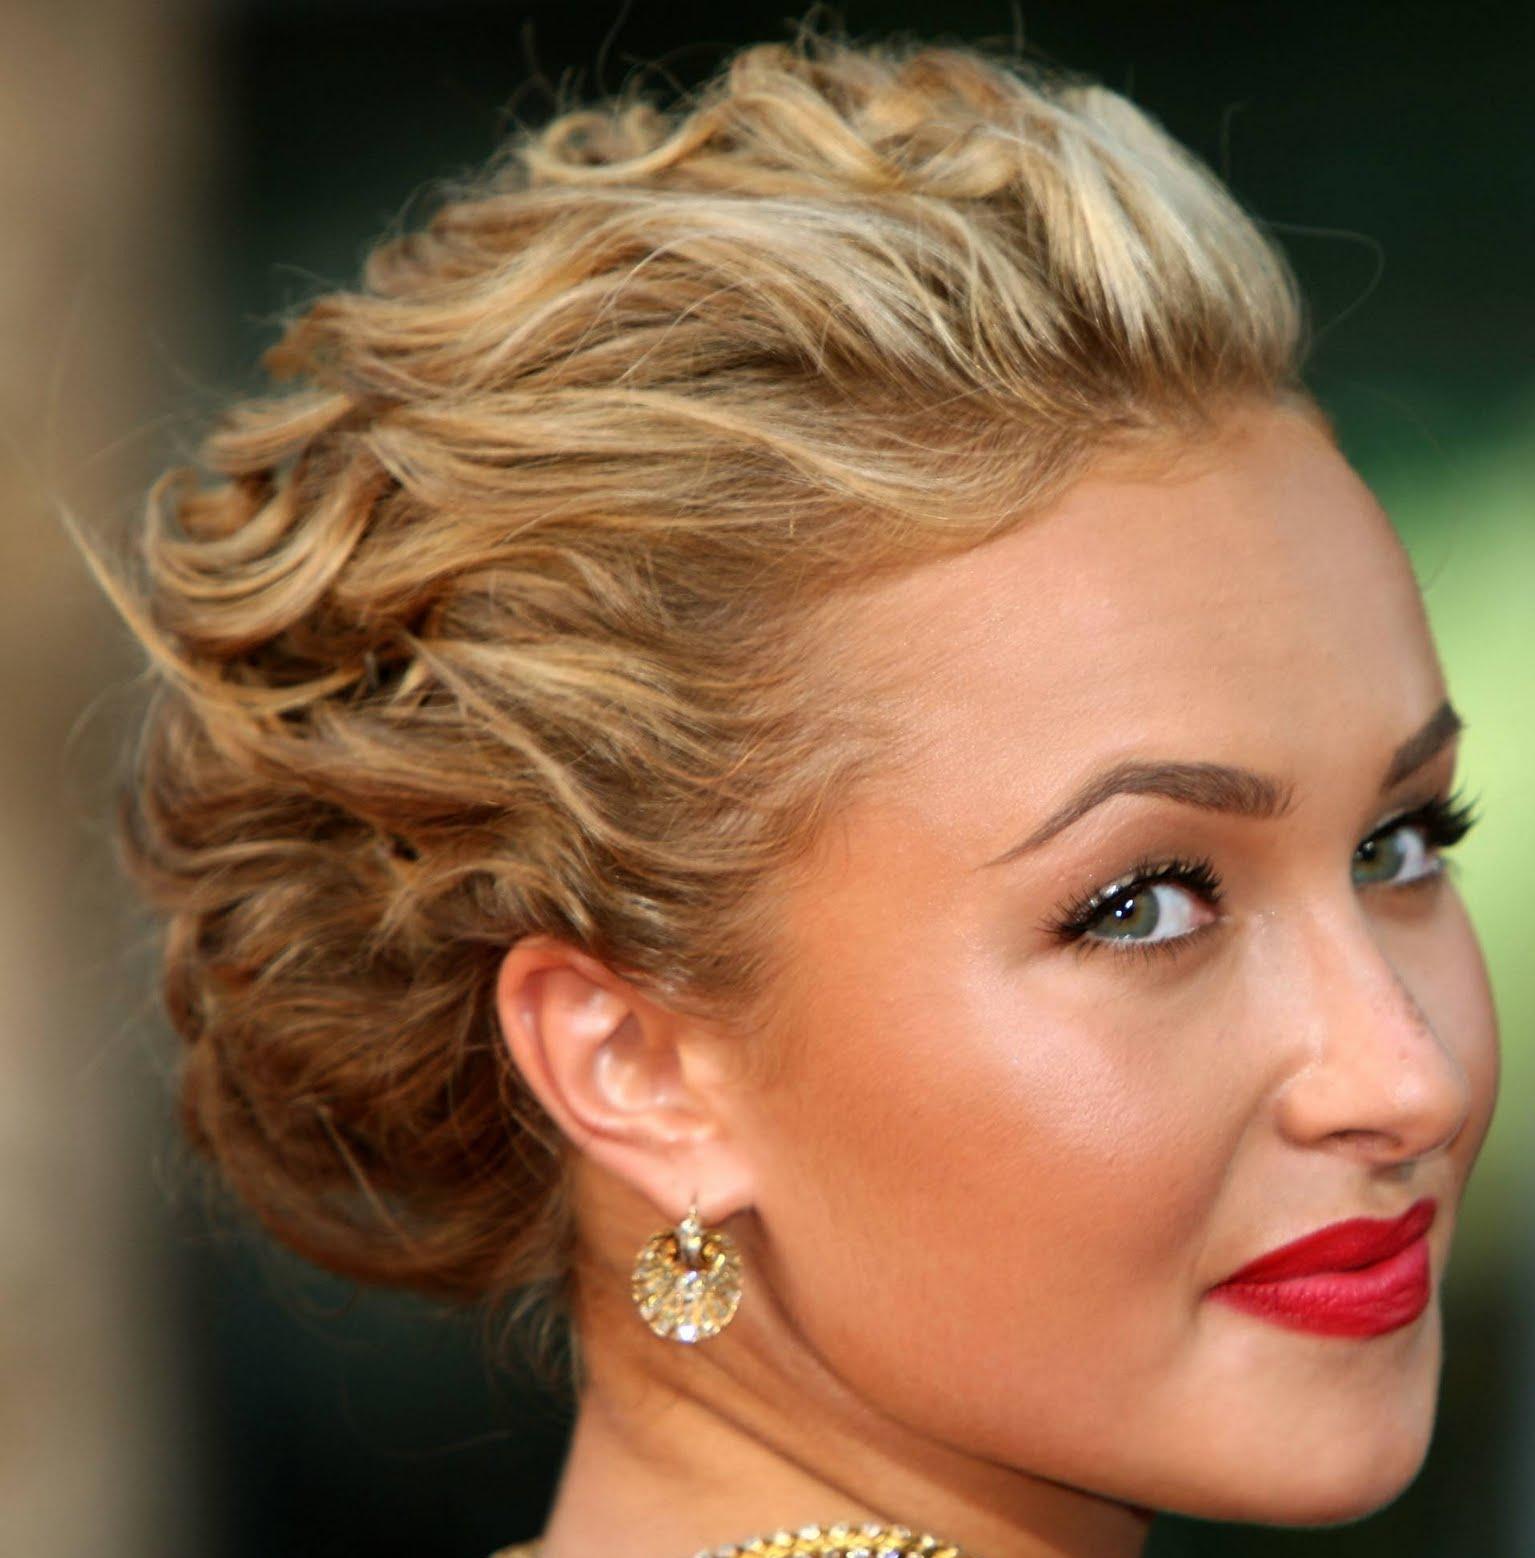 25 Beautiful Updo Hairstyles for Any Length Hair - The Xerxes